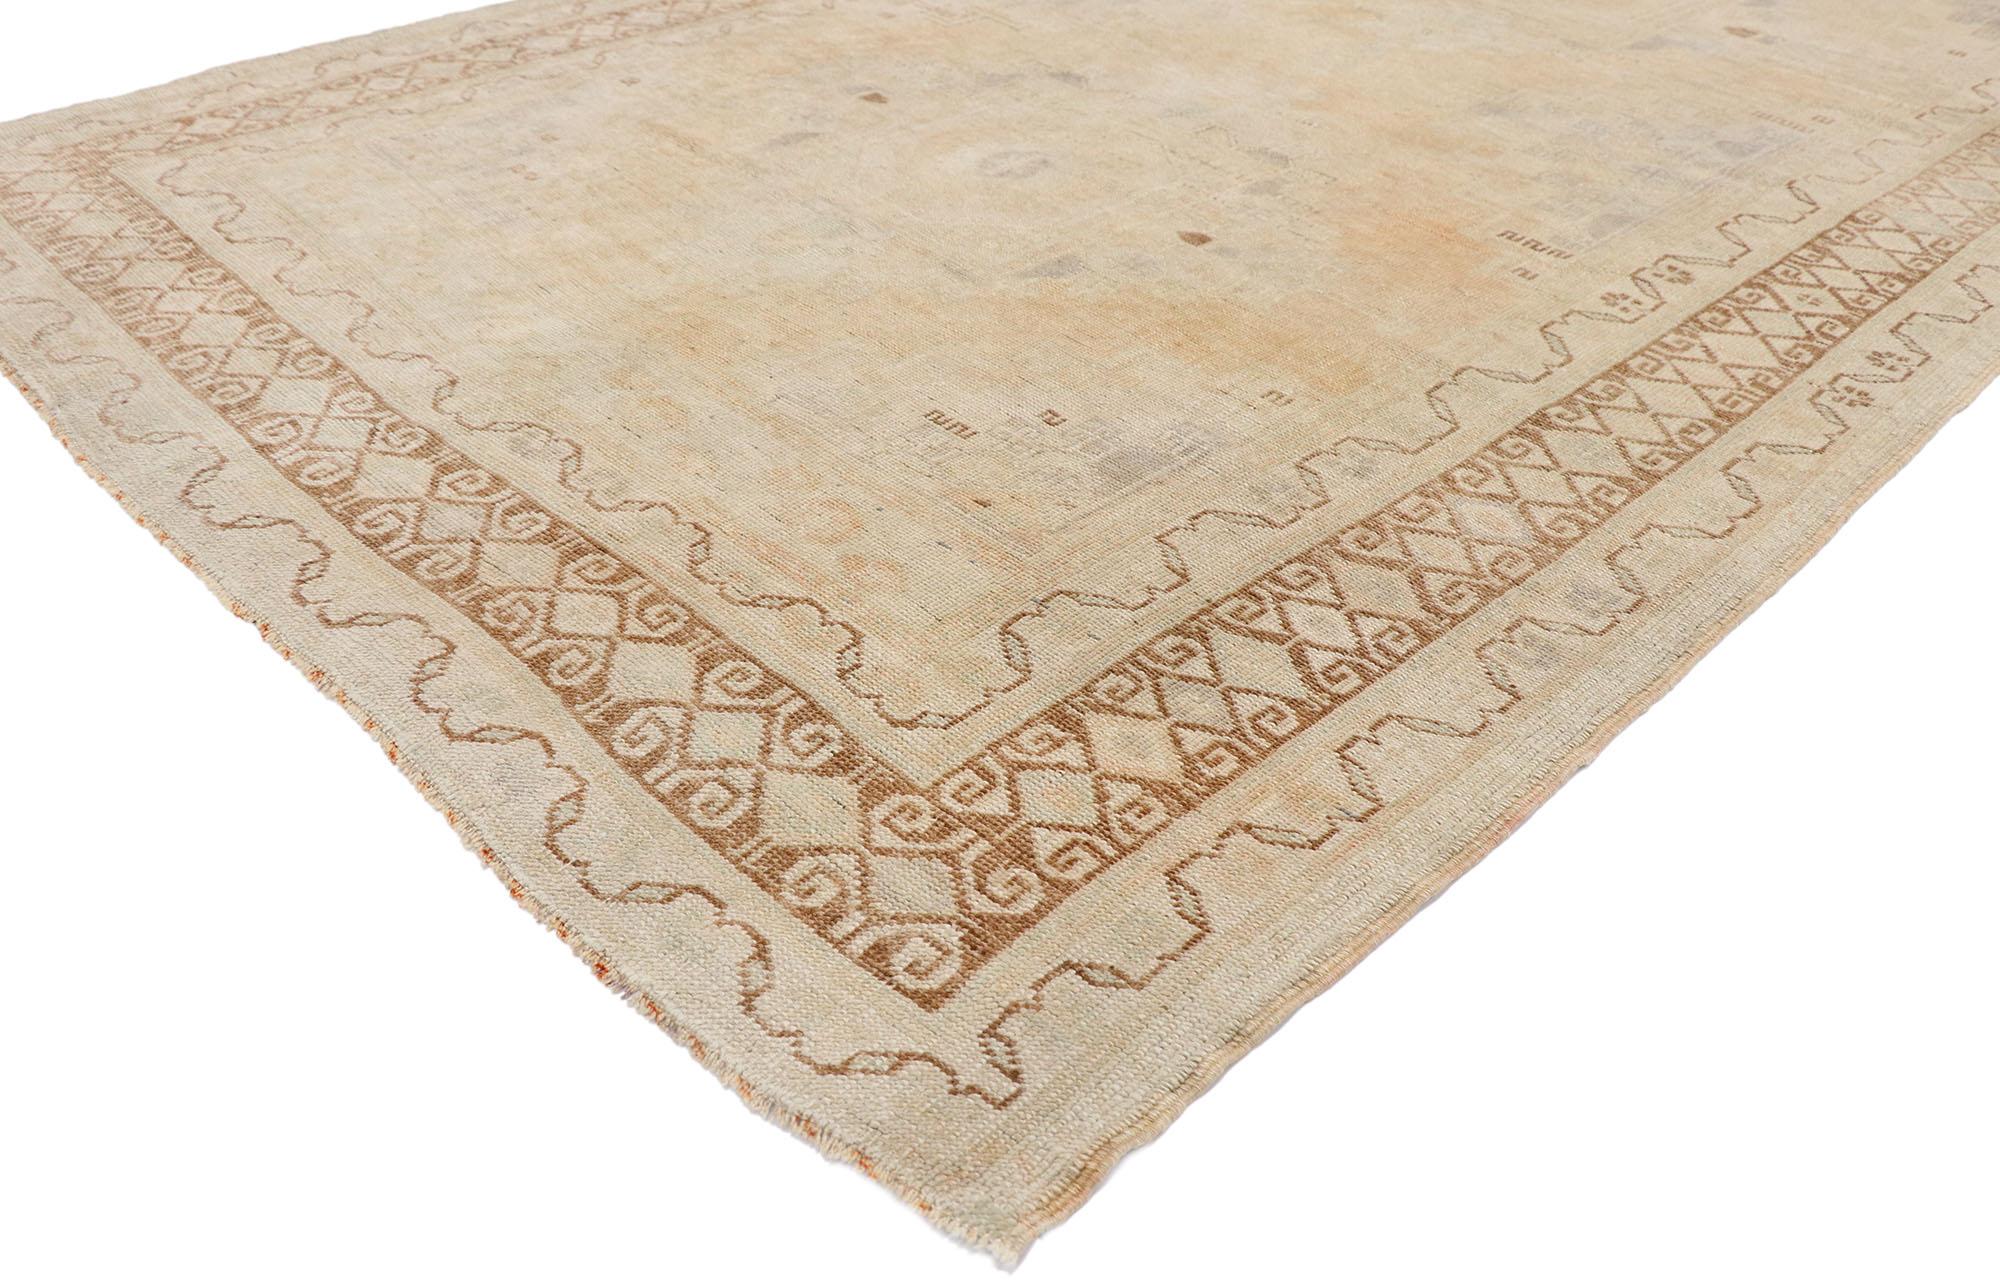 53560 Vintage Turkish Oushak rug with Rustic Shaker Style 05'03 x 09'04. Emanating grace and fine craftsmanship, this hand-knotted wool vintage Turkish Oushak rug charms with ease. The abrashed field features two botanical medallions decorated with